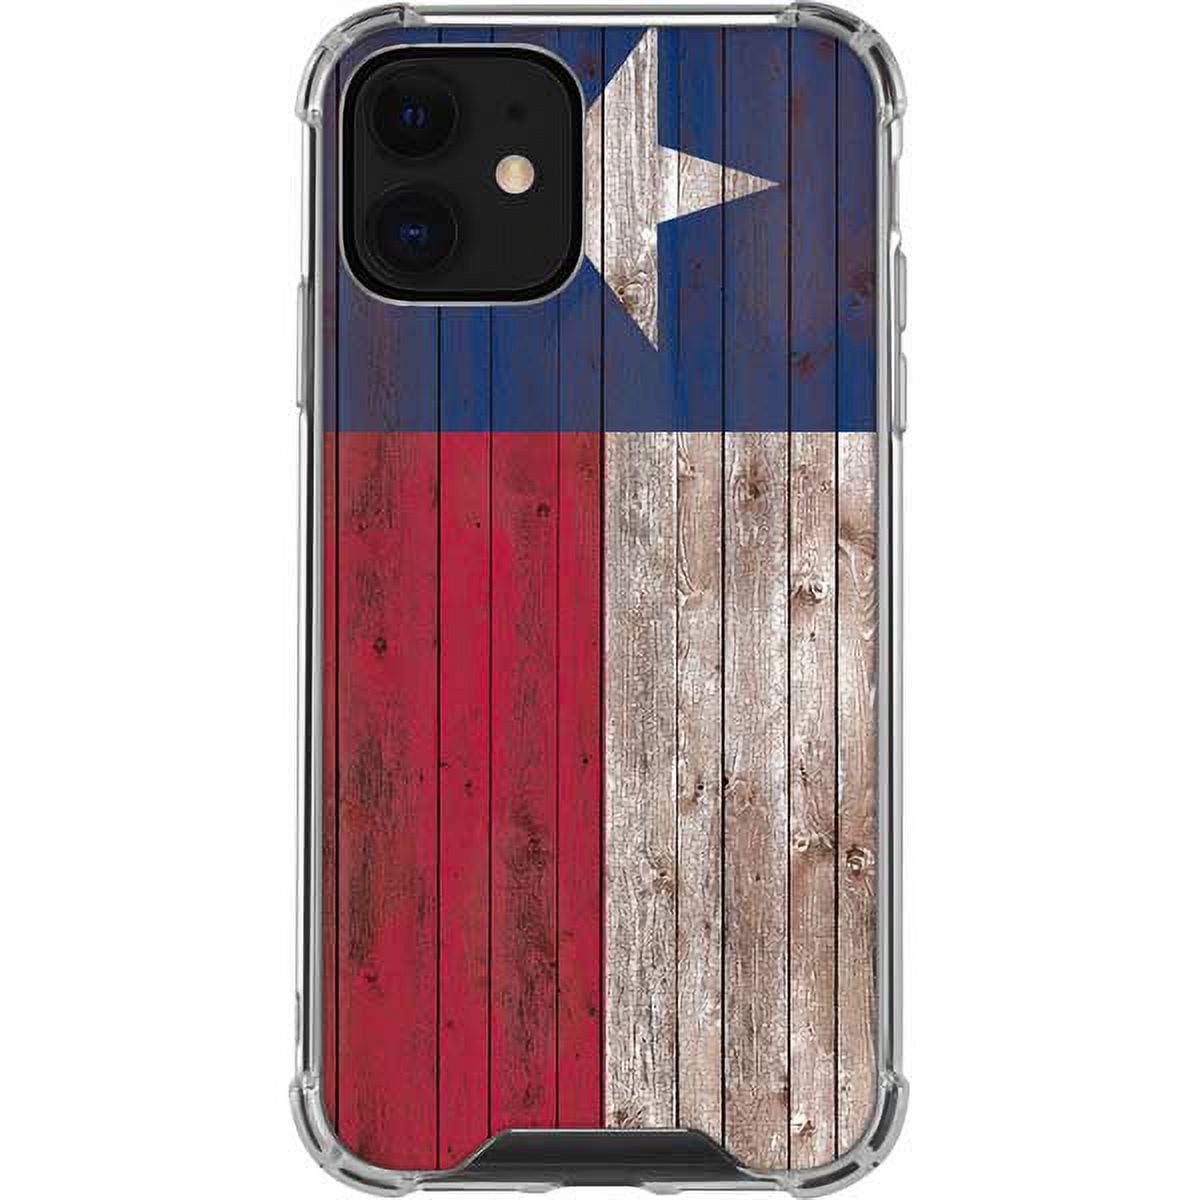  Skinit Decal Phone Skin Compatible with iPhone 6/6s